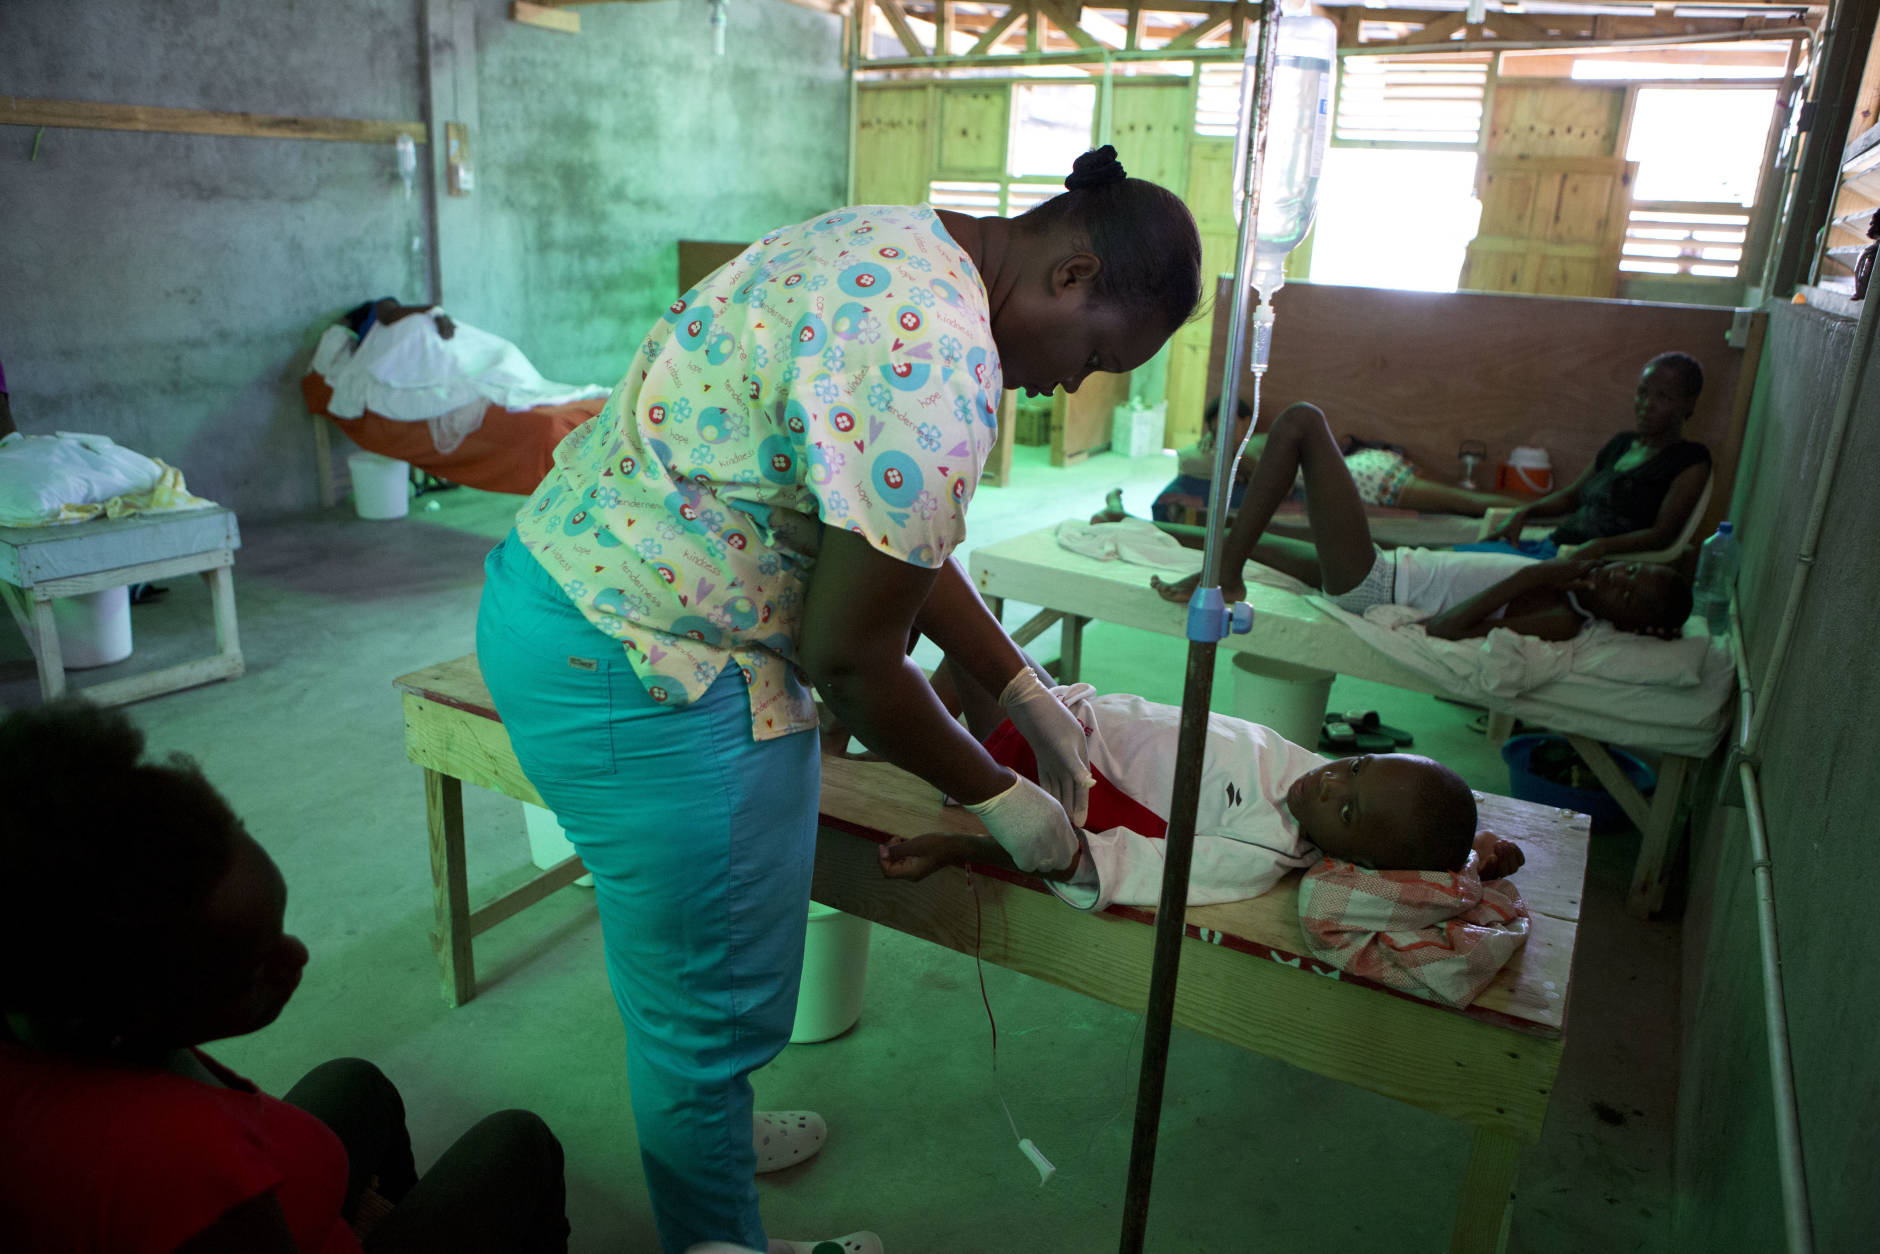 Nurse Mardi Rose Guerline adjusts the IV on 9-year-old Franzy Noel as his mother Geraldine Pierre looks on, in a cholera ward in Les Cayes Haiti, Tuesday, Oct. 11, 2016.  Health authorities have warned that Hurricane Matthew has created conditions that are likely to cause an increase in the deadly waterborne cholera virus.(AP Photo/Rebecca Blackwell)